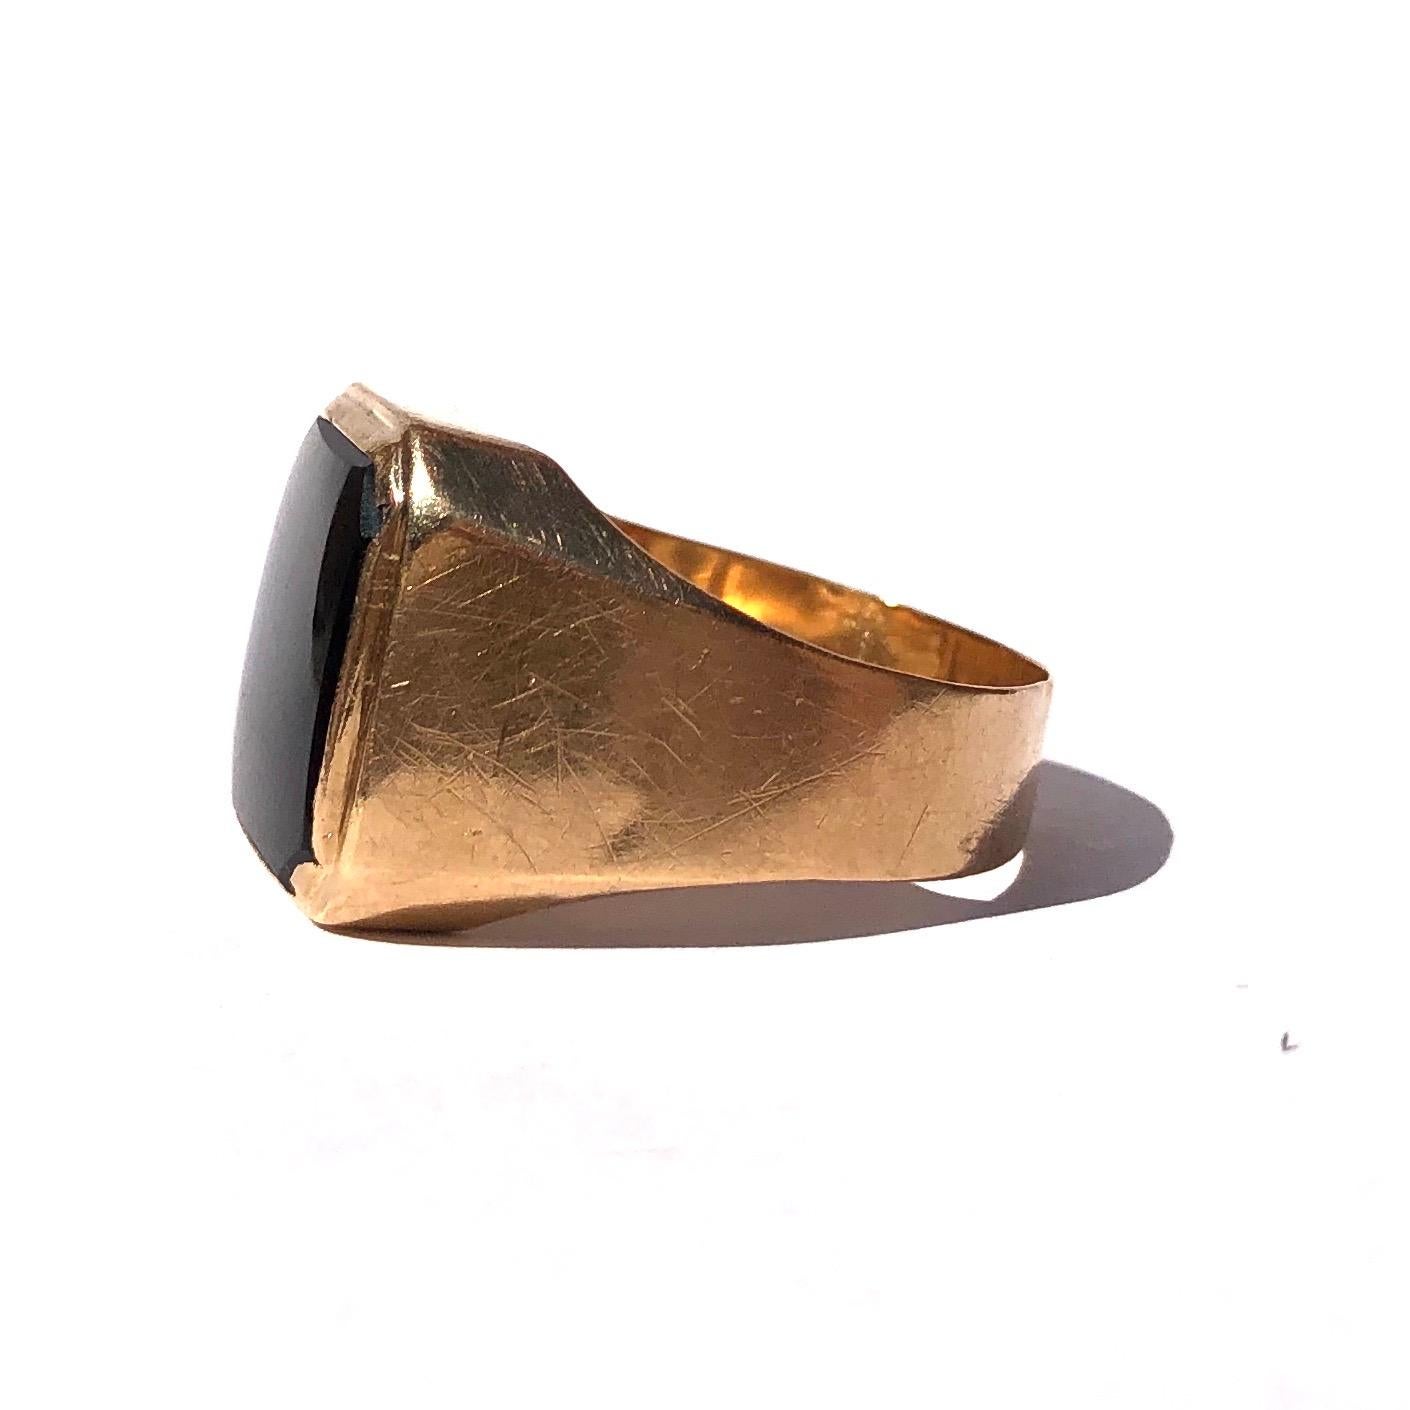 The onyx in this signet ring as large and in great condition. It has a wonderful gloss and is complimented by the chunky 9ct gold band. 

Ring Size: W or 11
Stone Dimensions: 14x11mm 

Weight: 5.24g